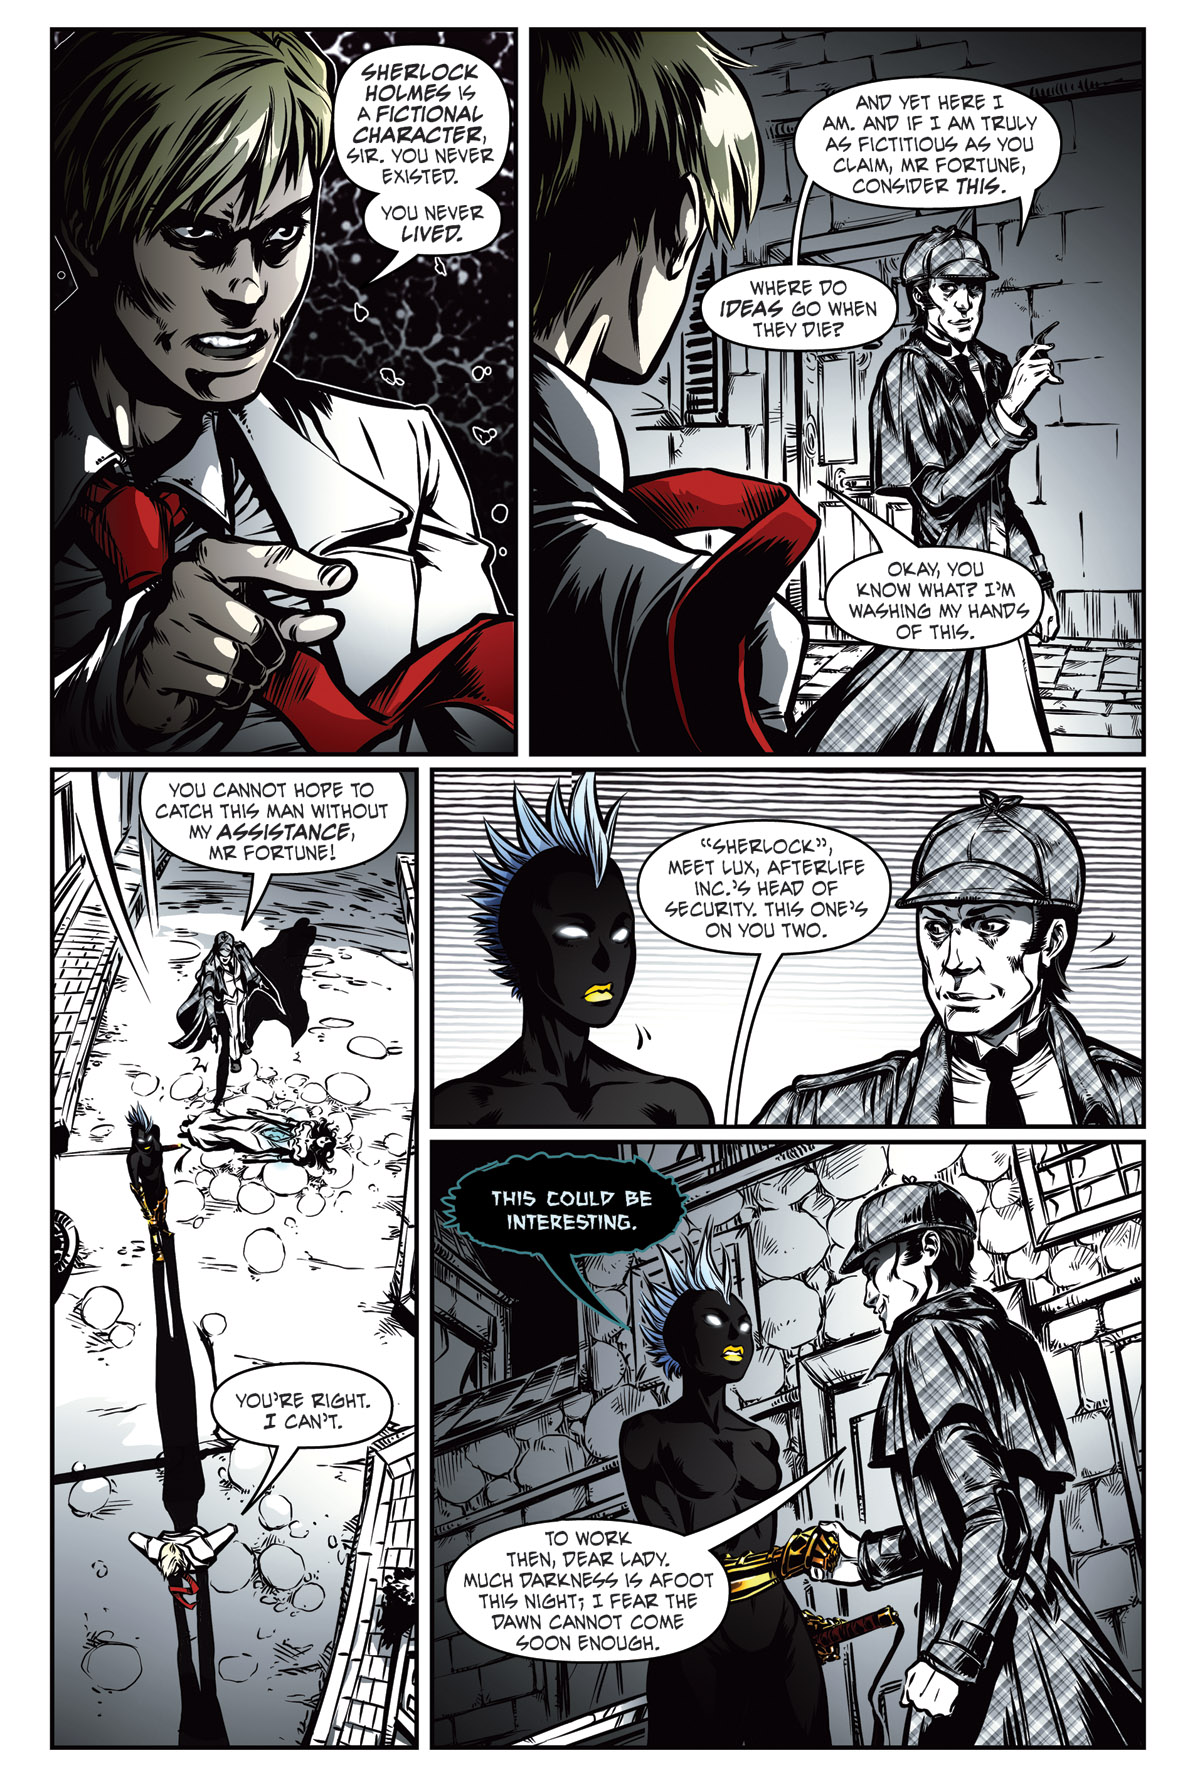 Afterlife Inc. | Elementary | Page 3